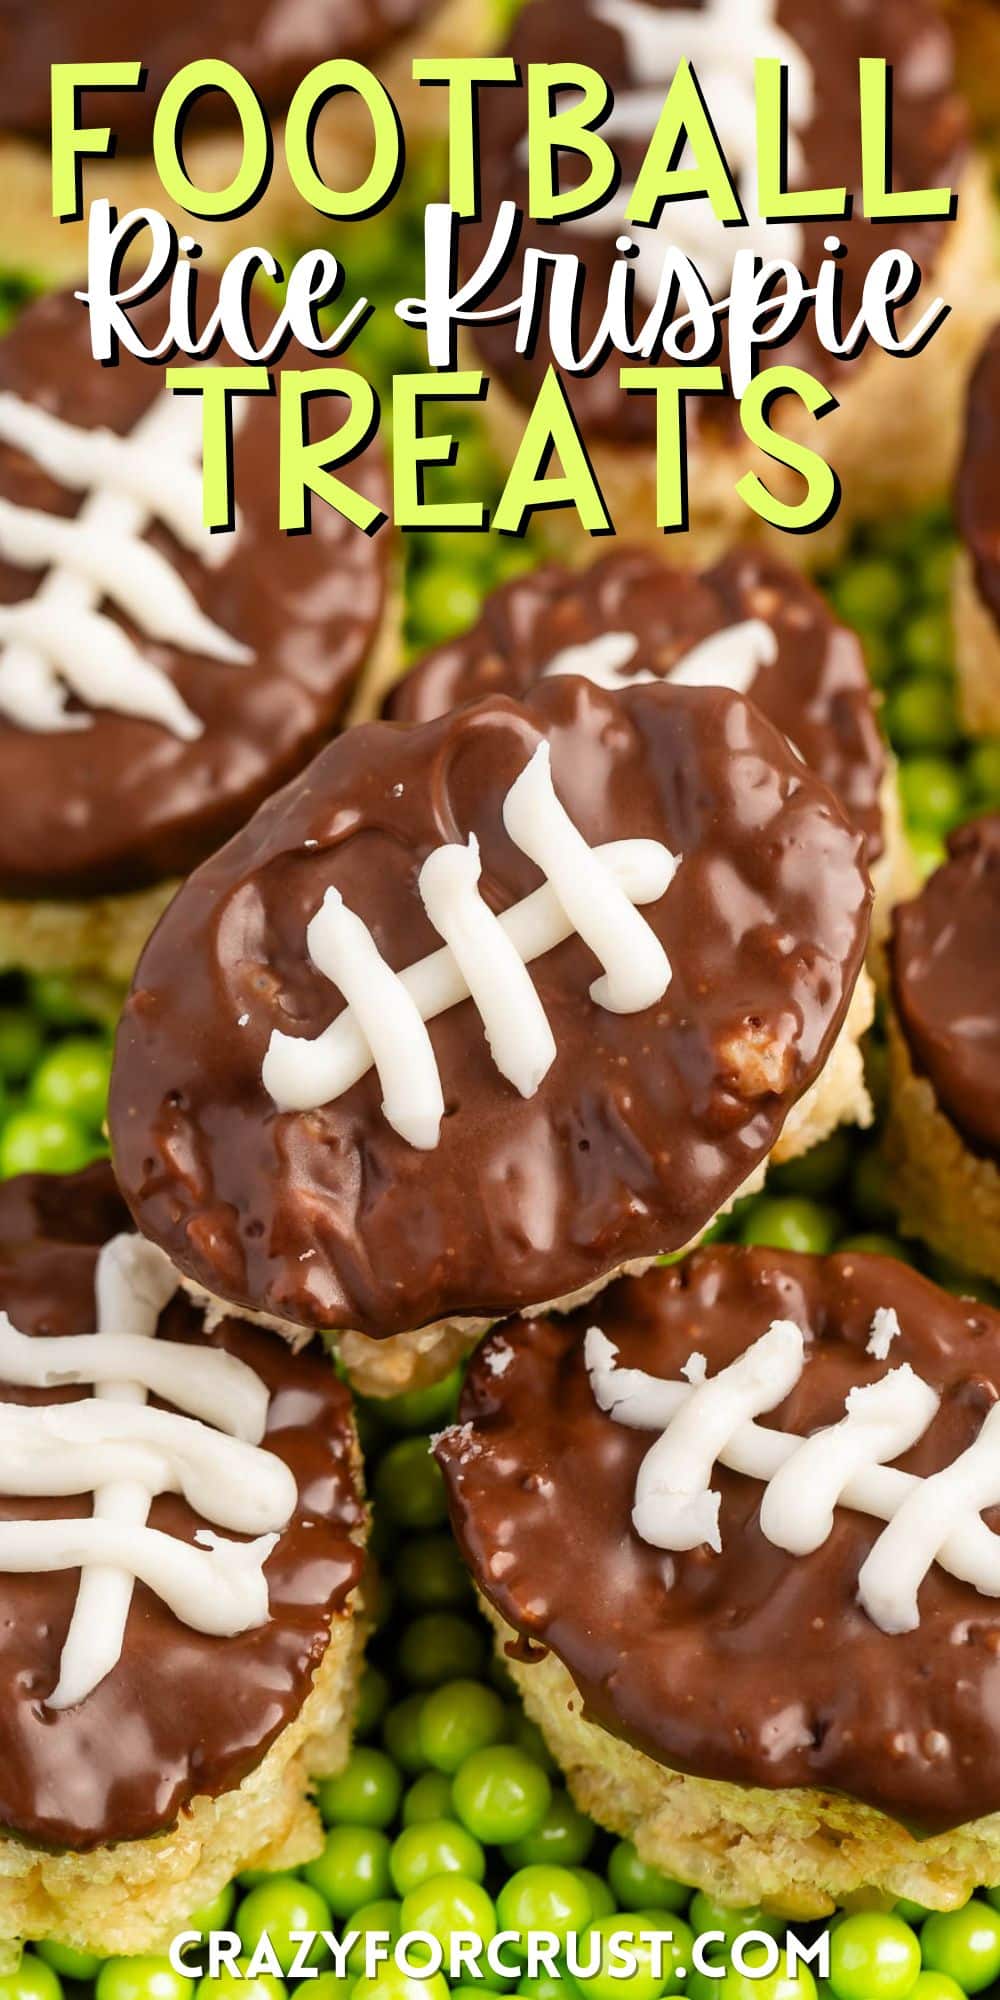 mini Rice Krispie treats in the shape on footballs with brown and white frosting on top to resembles a football on a field with words on the image.